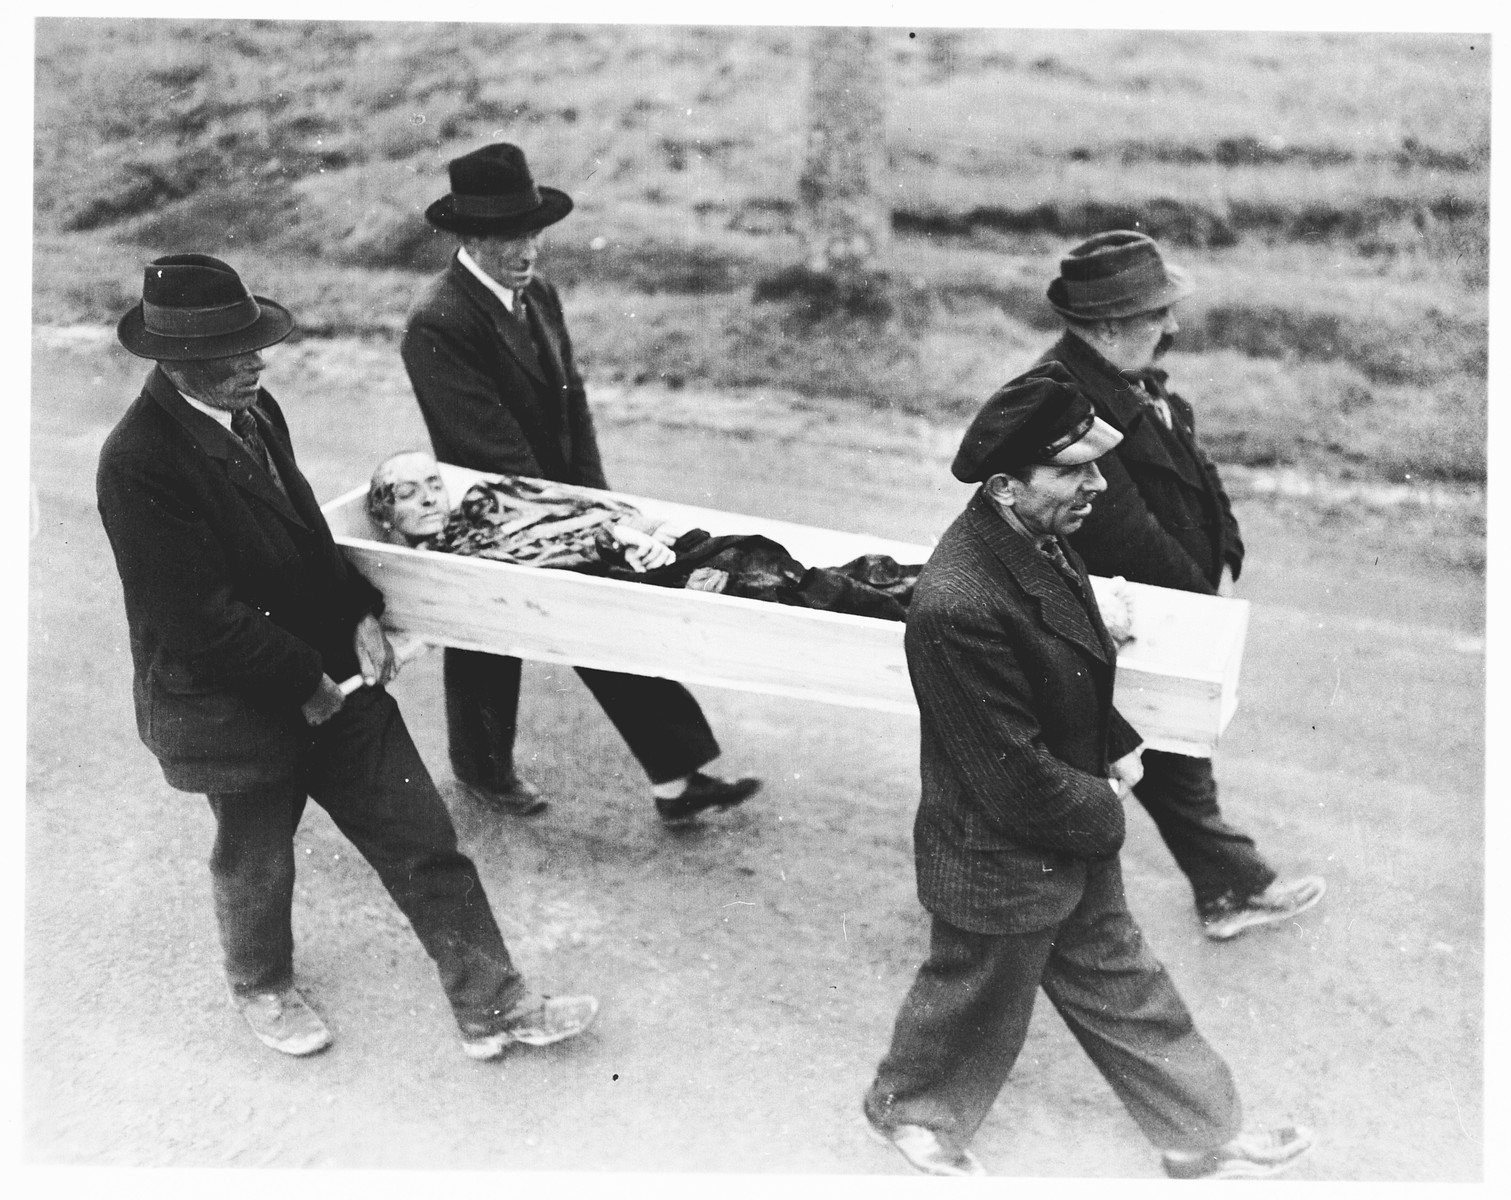 German civilians from Neunburg carry a body found in a nearby forest to the town cemetery for proper burial. 

The victim was a Jewish prisoner from Flossenbuerg shot while on a death march.